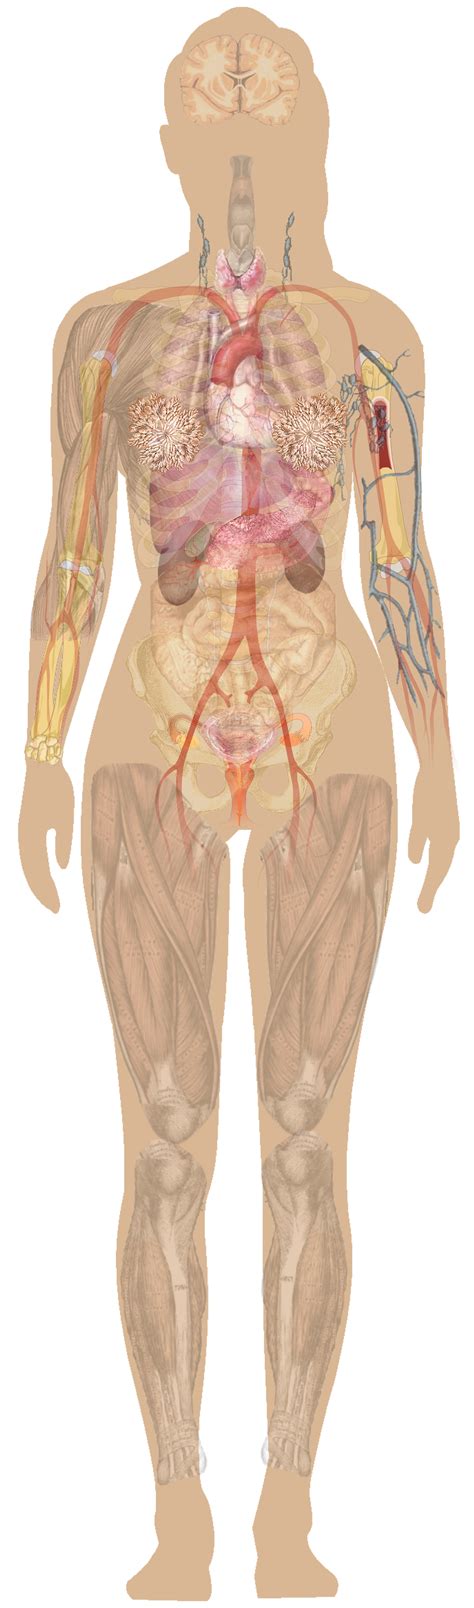 Female body anatomy sketch at paintingvalley com explore. Some detail on human anatomy woman | Human anatomy female ...